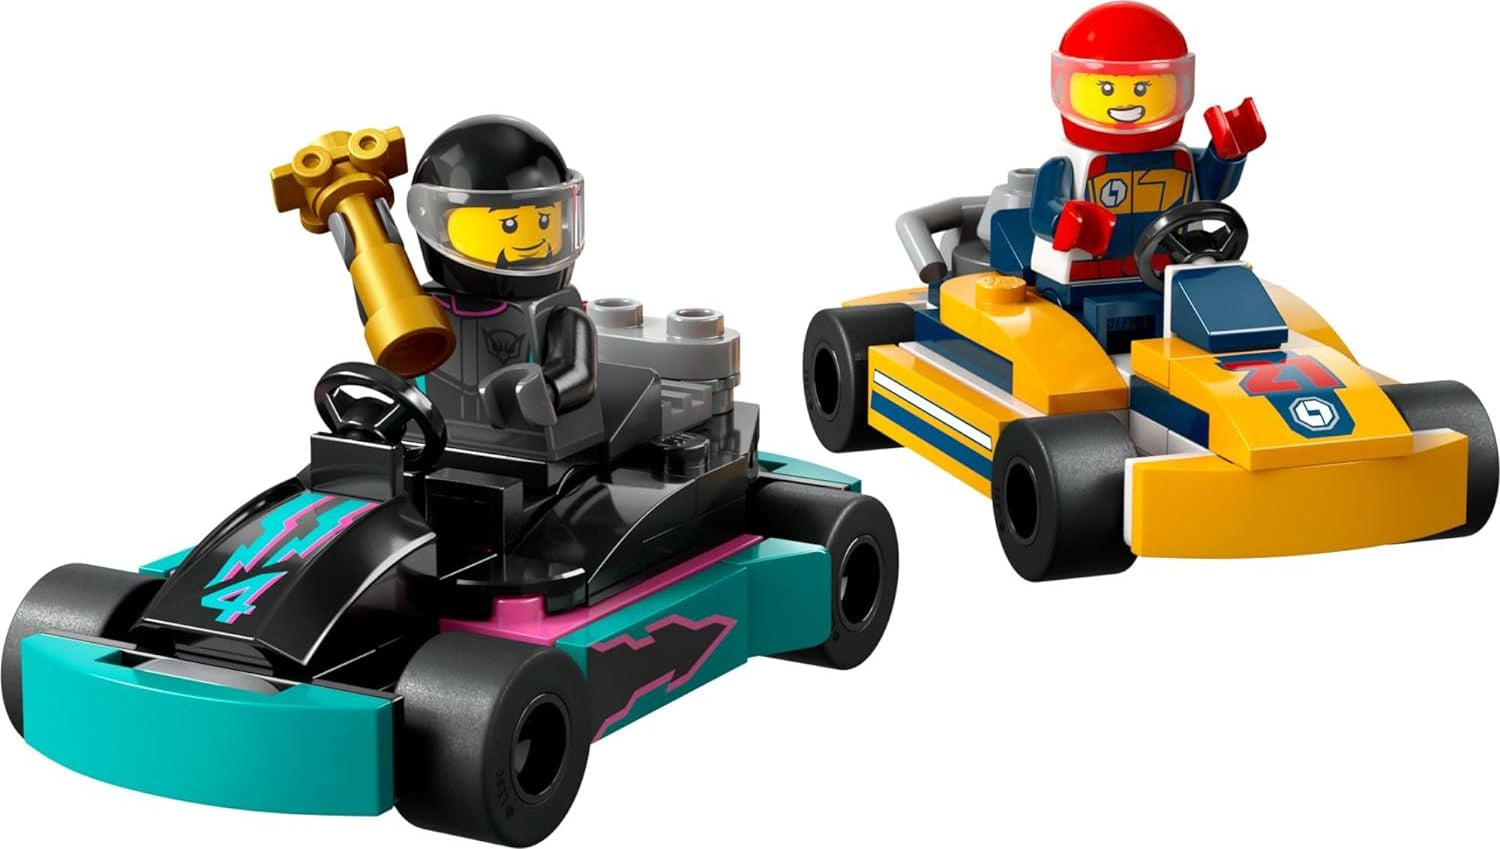 LEGO 60400 City Go-Karts and Race Drivers Toy Playset, 2 Driver Minifigures, Racing Vehicle Car Toy, Fun Race Car Toy Gift.